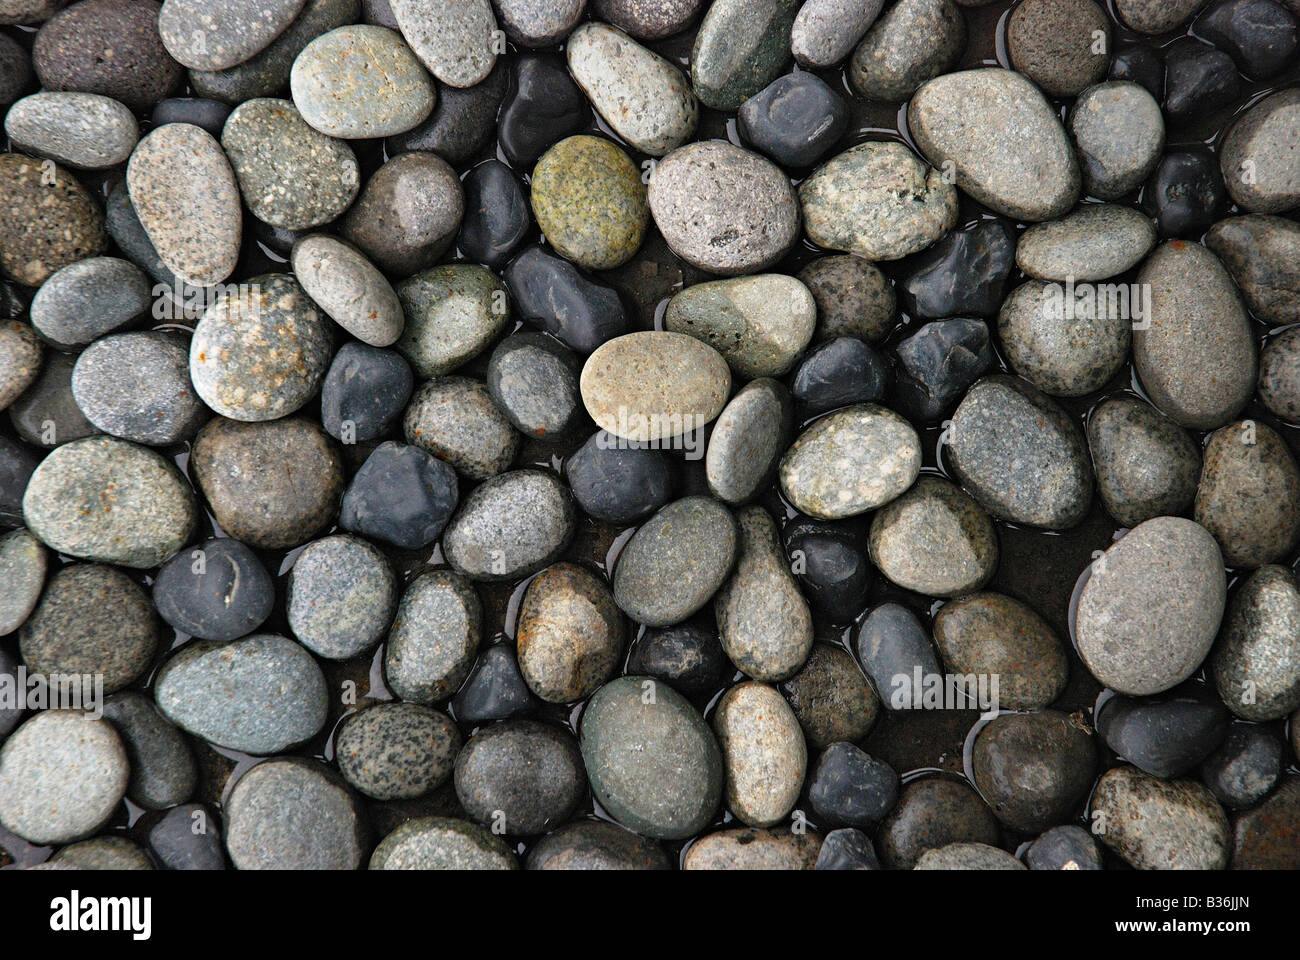 A pebble is a clast of rock with a particle size of 4 to 64 millimeters based on the Krumbein phi scale of sedimentology. Stock Photo